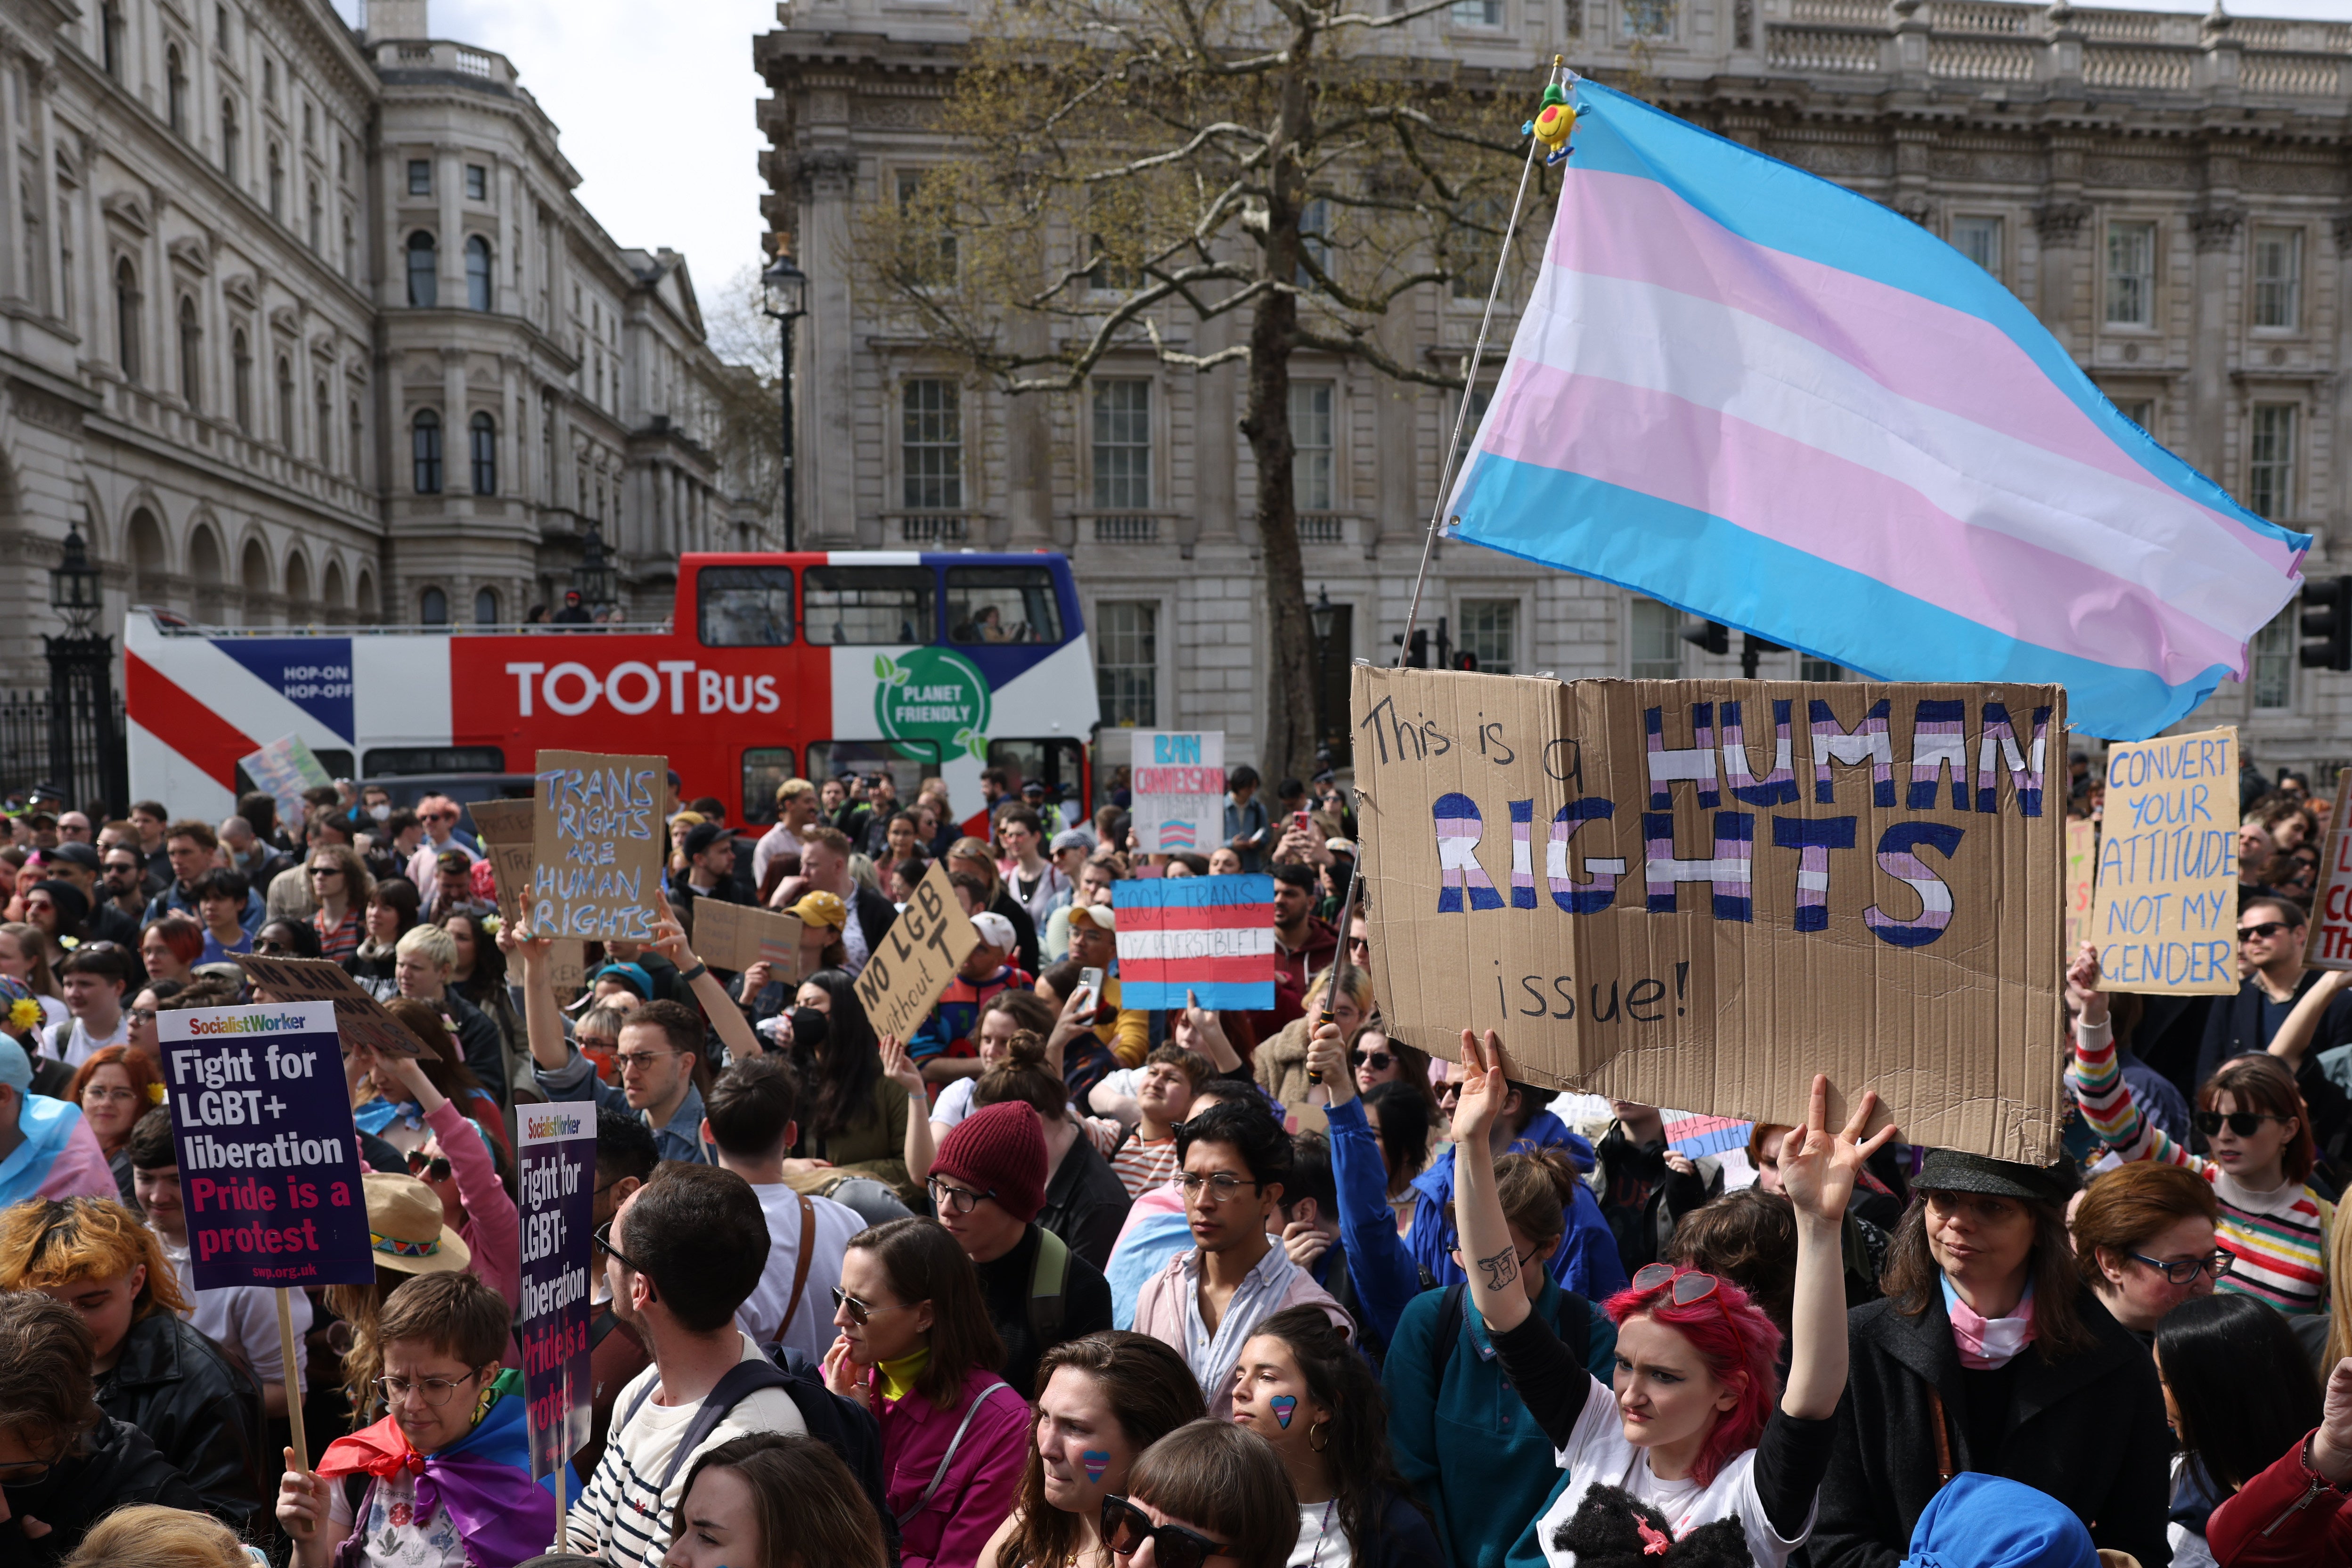 Demonstration against government’s decision not to ban conversion therapy for transgender people, 10 April, 2022